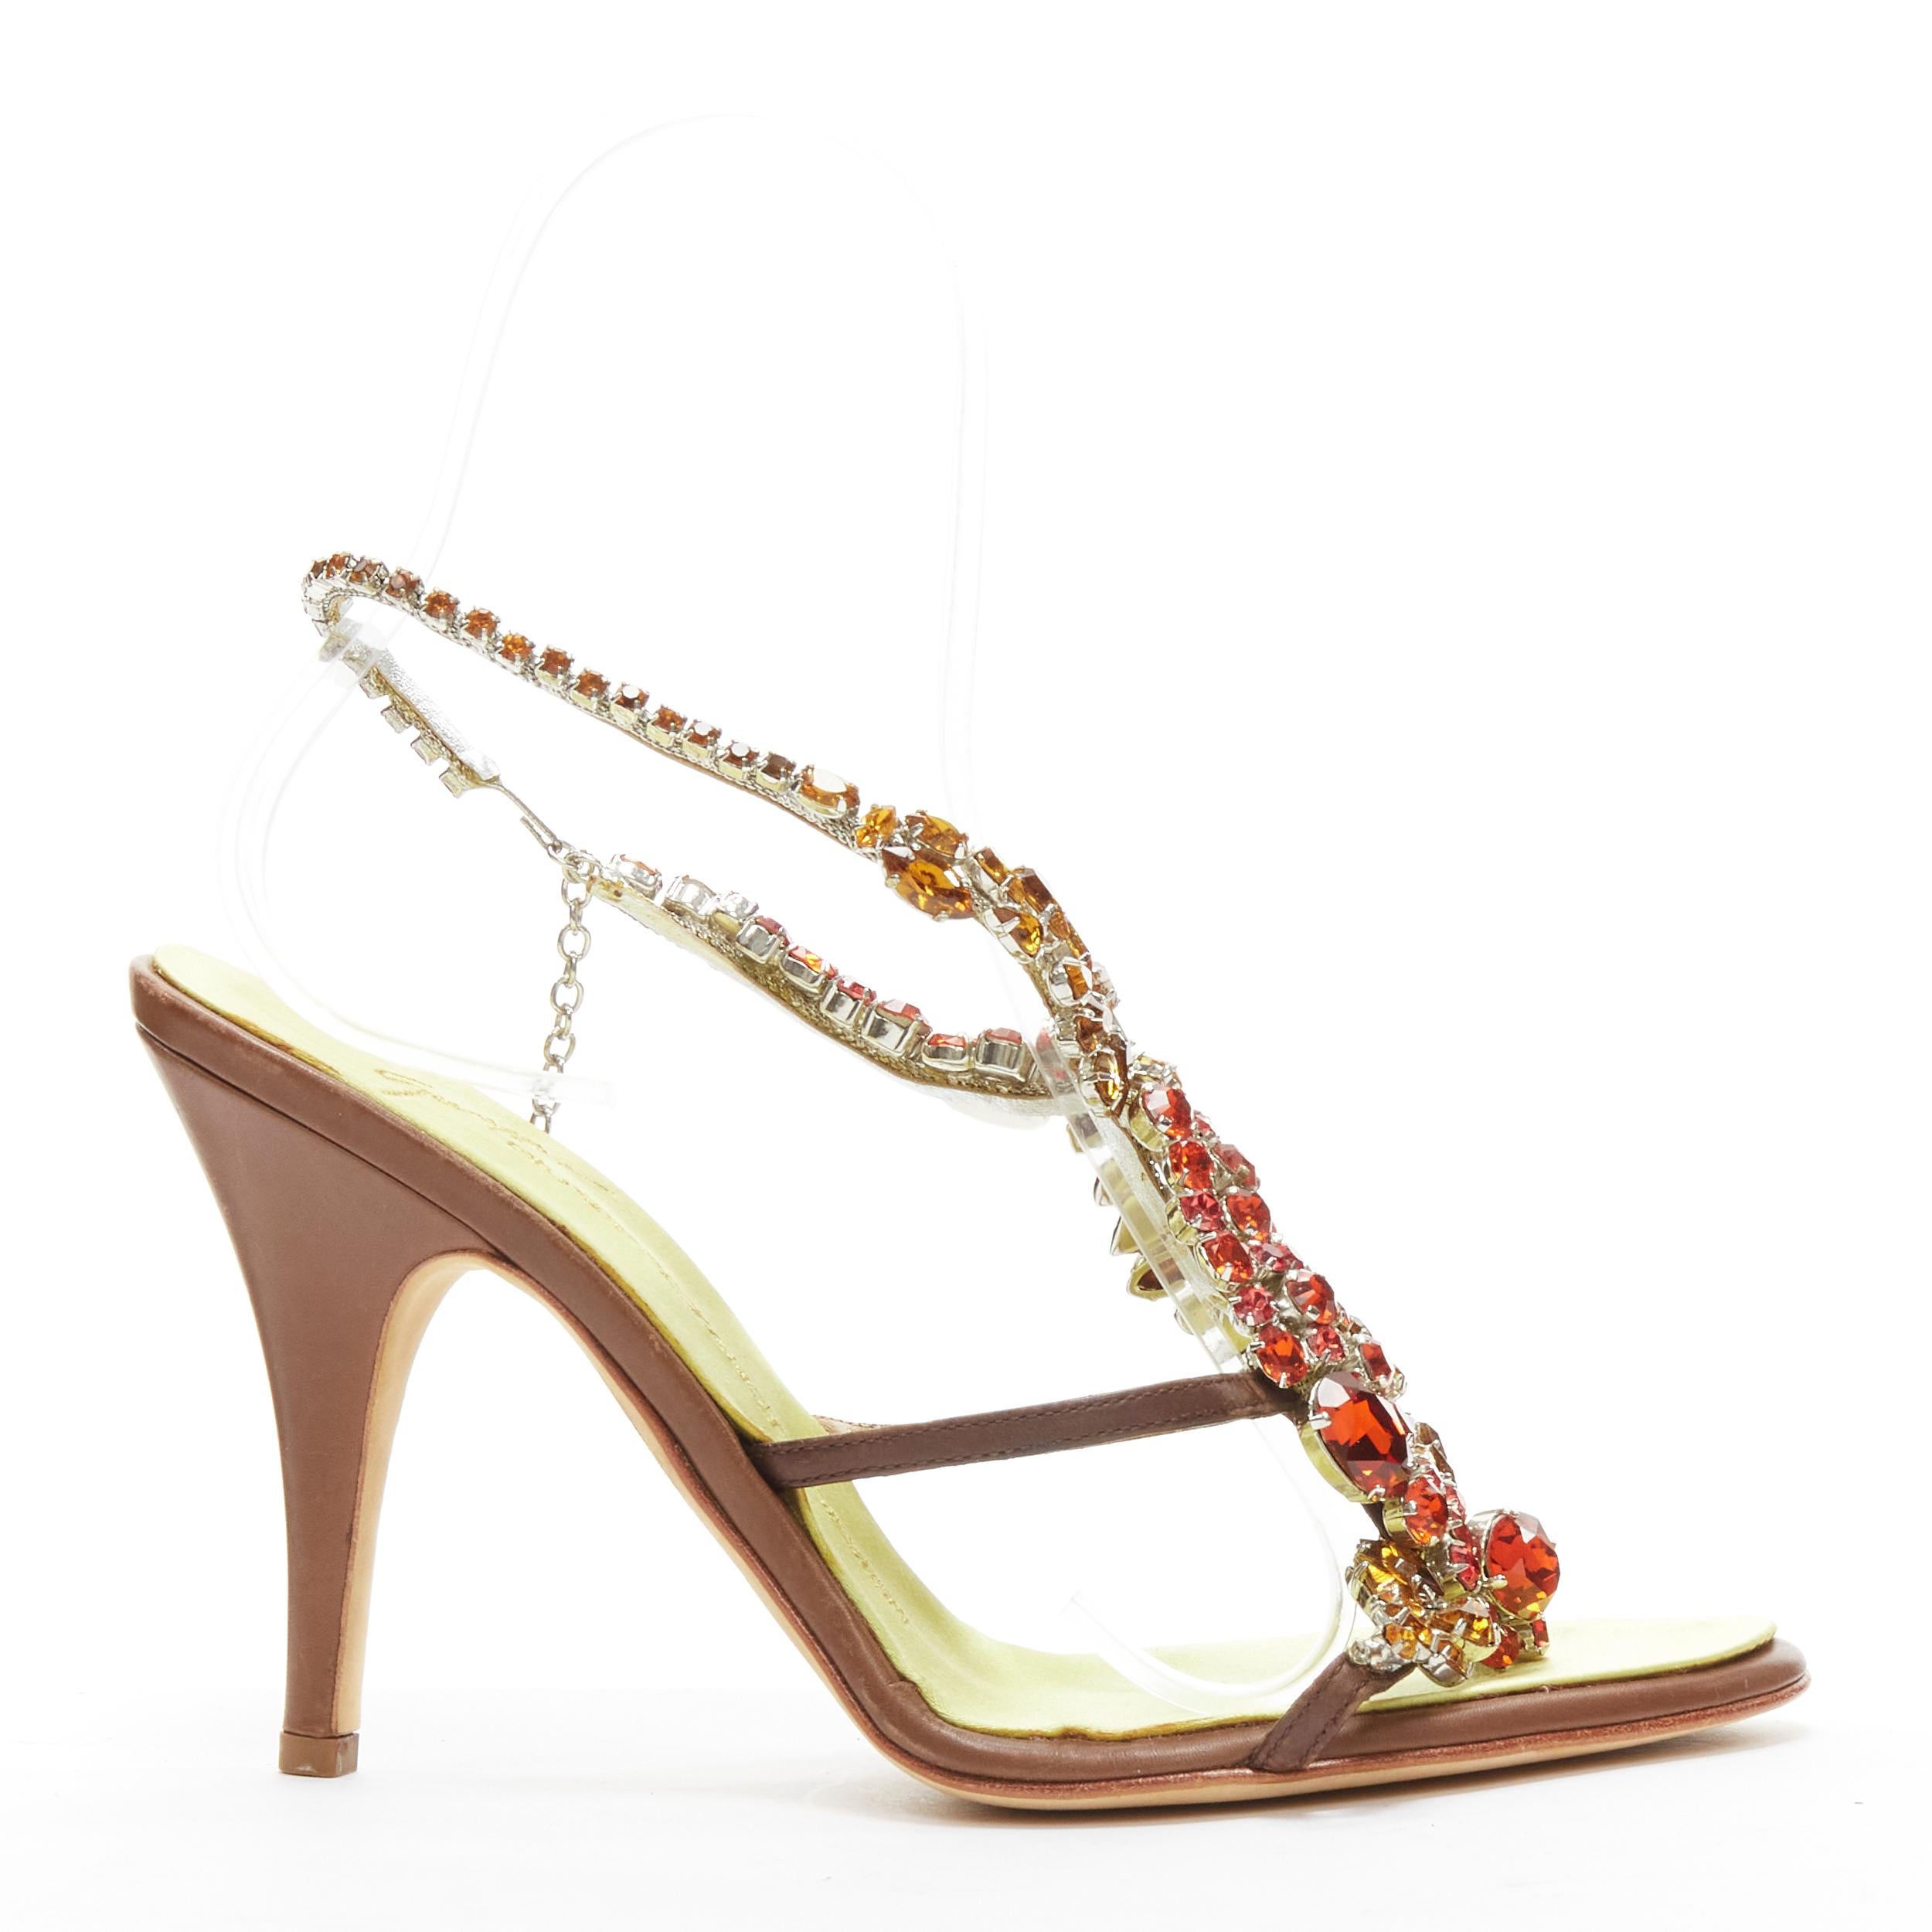 GIUSEPPE ZANOTTI red yellow rhinestone embellished brown leather sandals EU38
Reference: GIYG/A00273
Brand: Giuseppe Zanotti
Material: Leather
Color: Red, Yellow
Pattern: Solid
Closure: Hook & Bar
Lining: Satin
Extra Details: Hook and chain closure